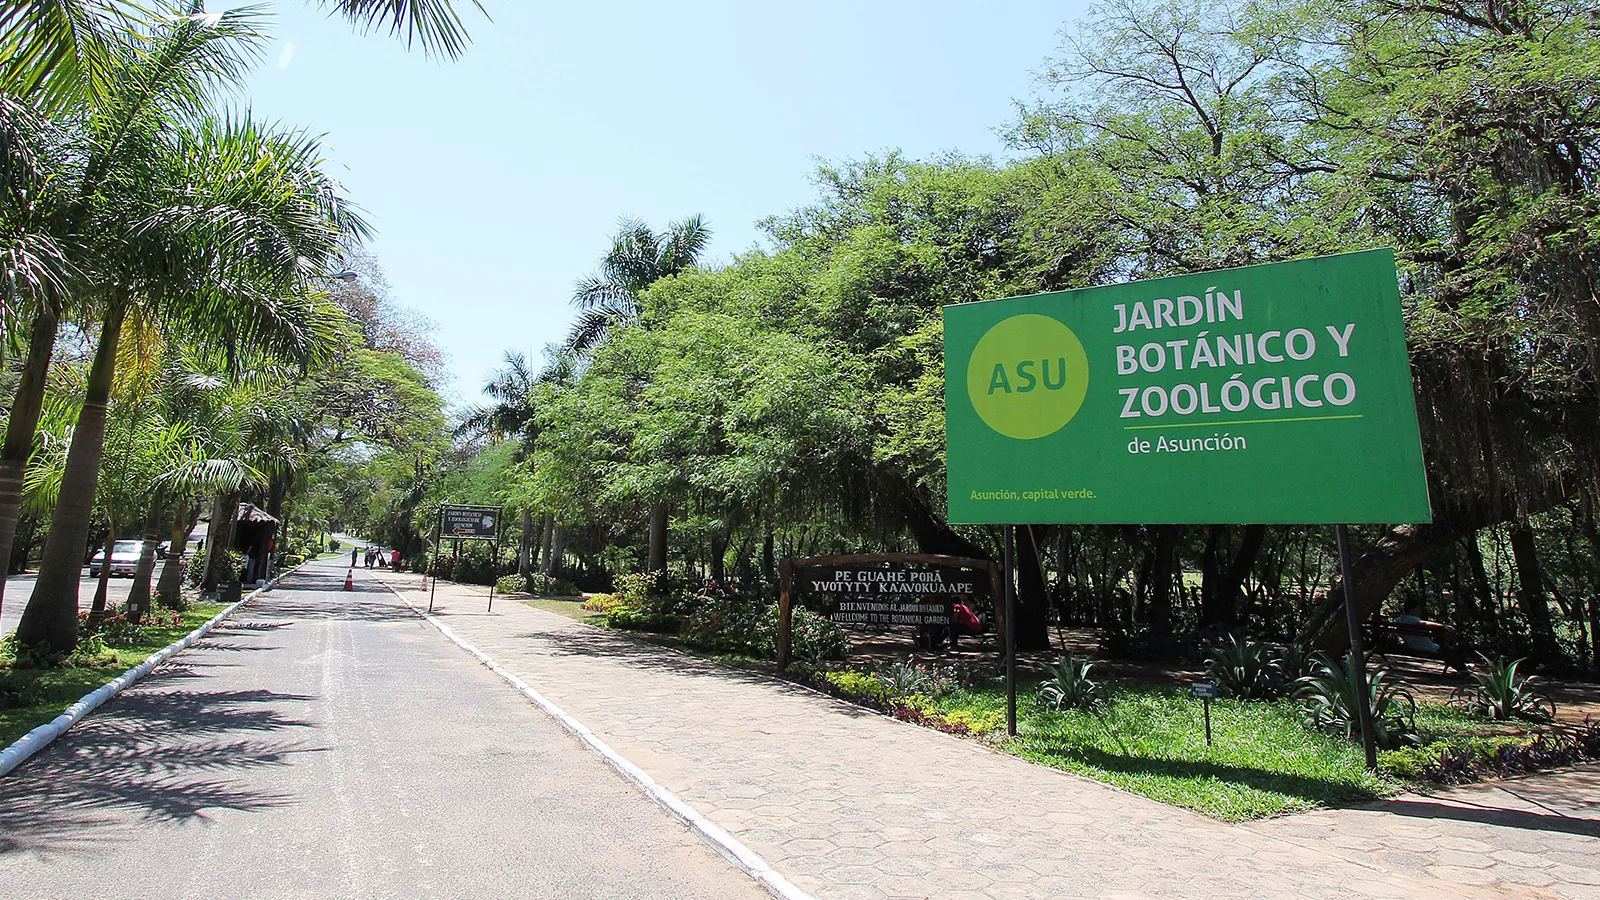 Botanical Garden and Zoo in Paraguay, South America | Zoos & Sanctuaries,Botanical Gardens - Rated 3.8